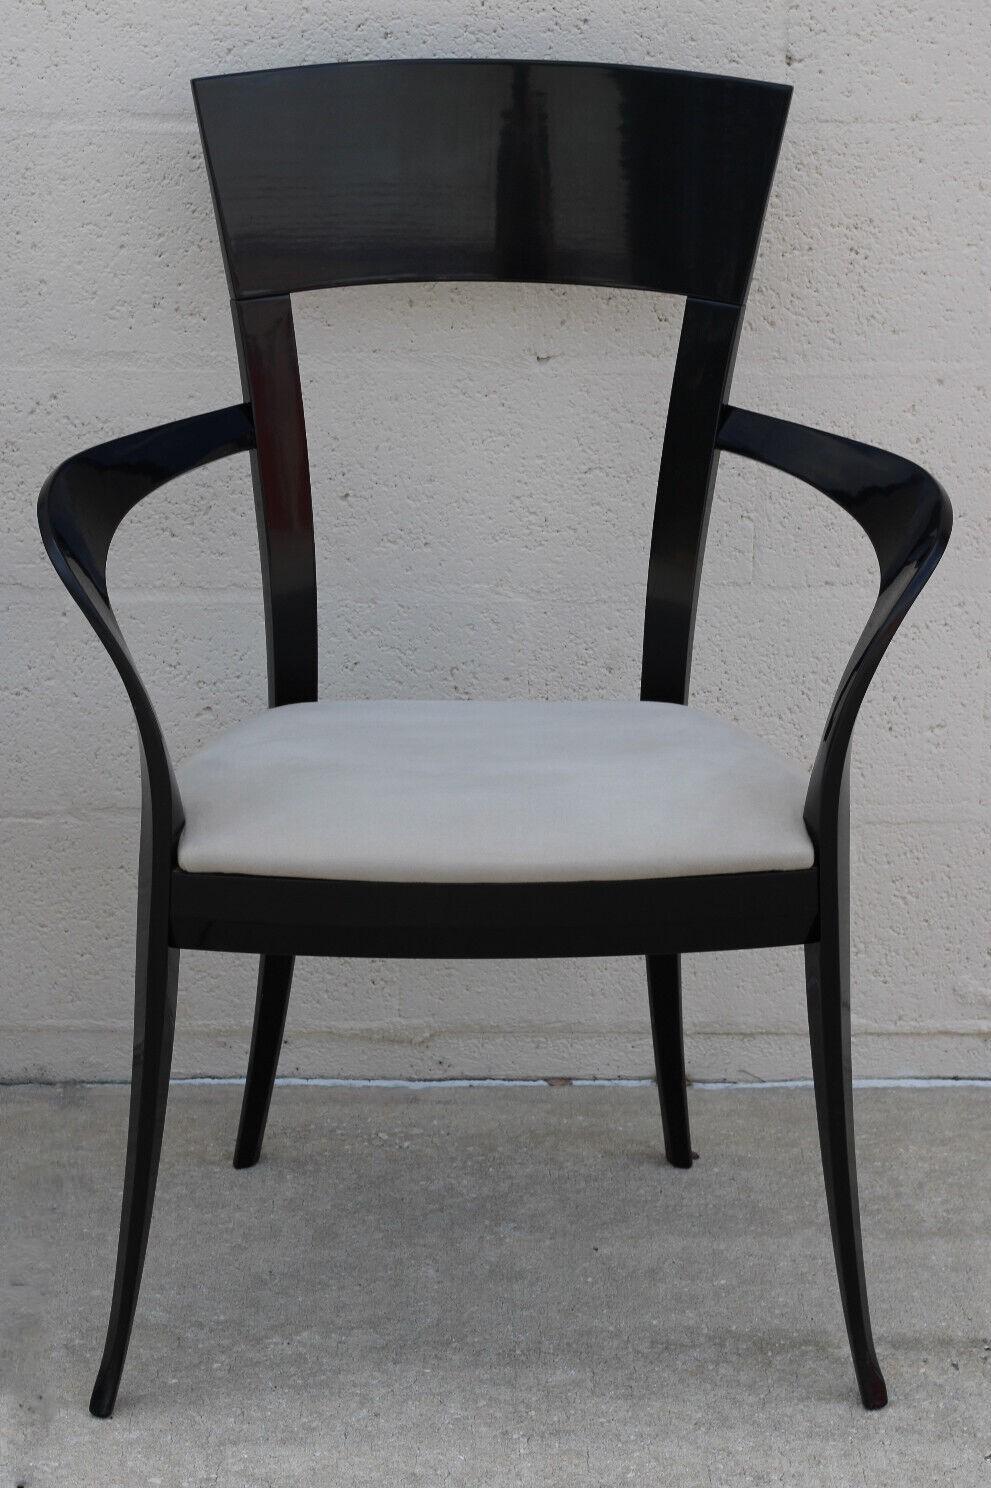 Eight Sculptural Black Lacquer Dining Chairs by Pietro Costantini, Made in Italy For Sale 6